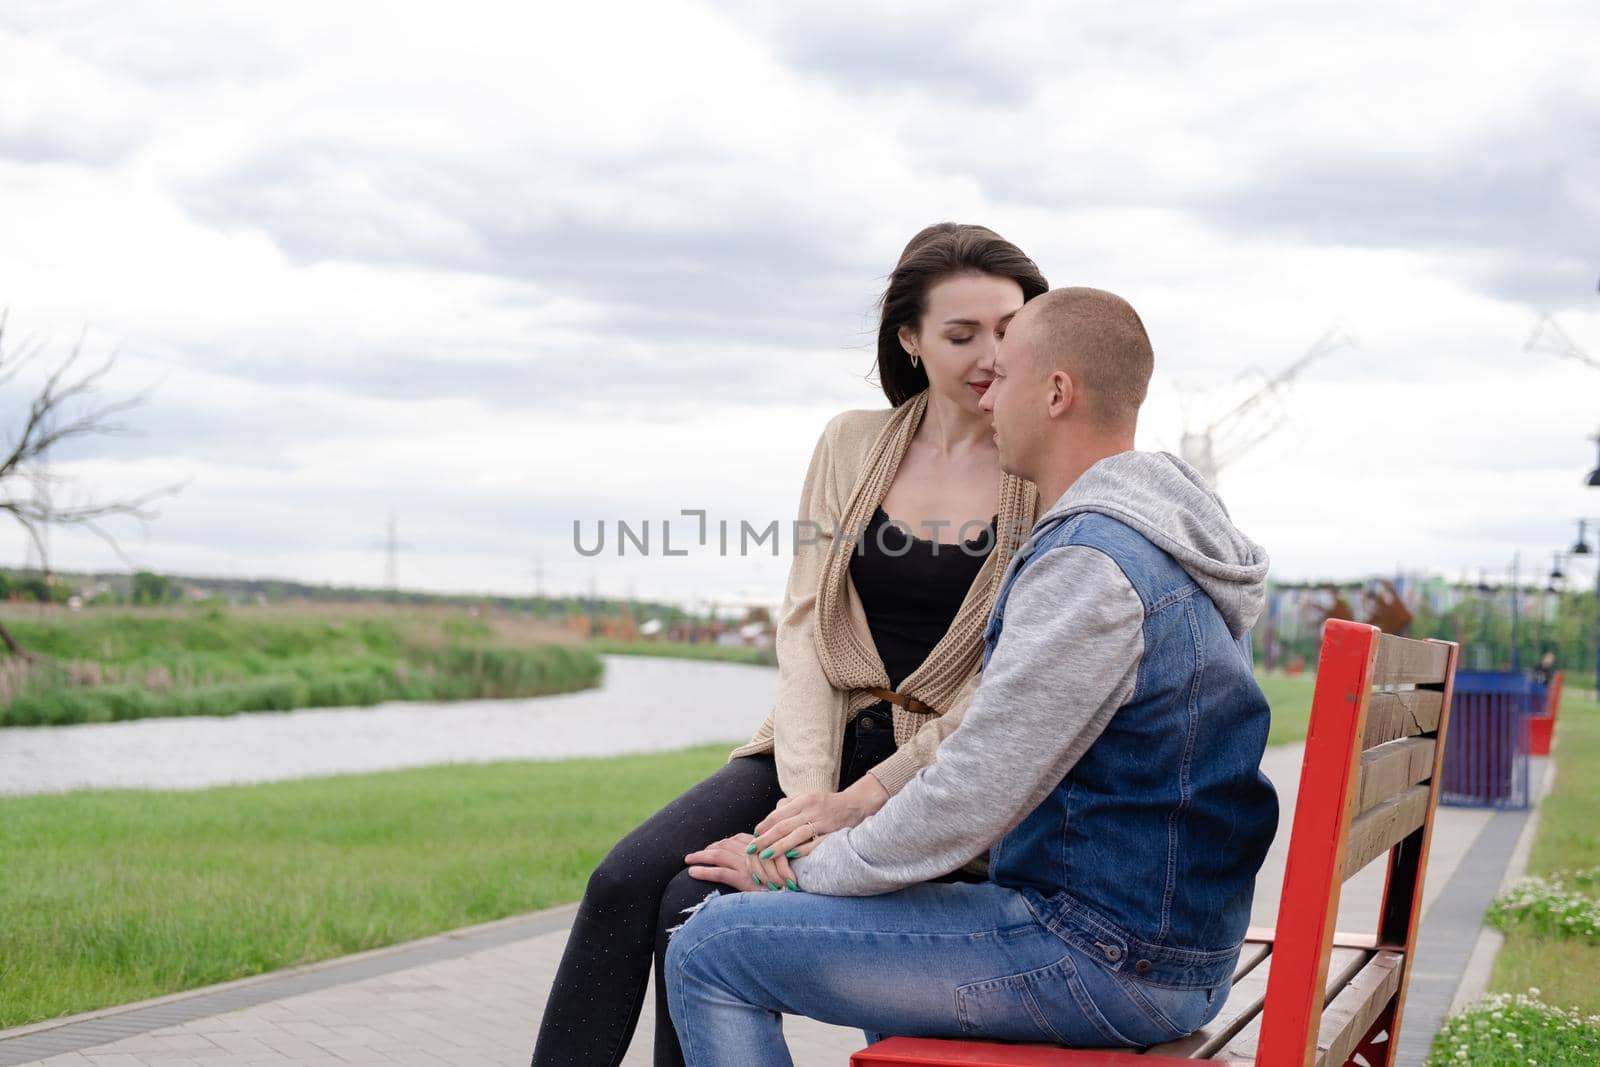 beautiful young couple sitting on a bench in the park.